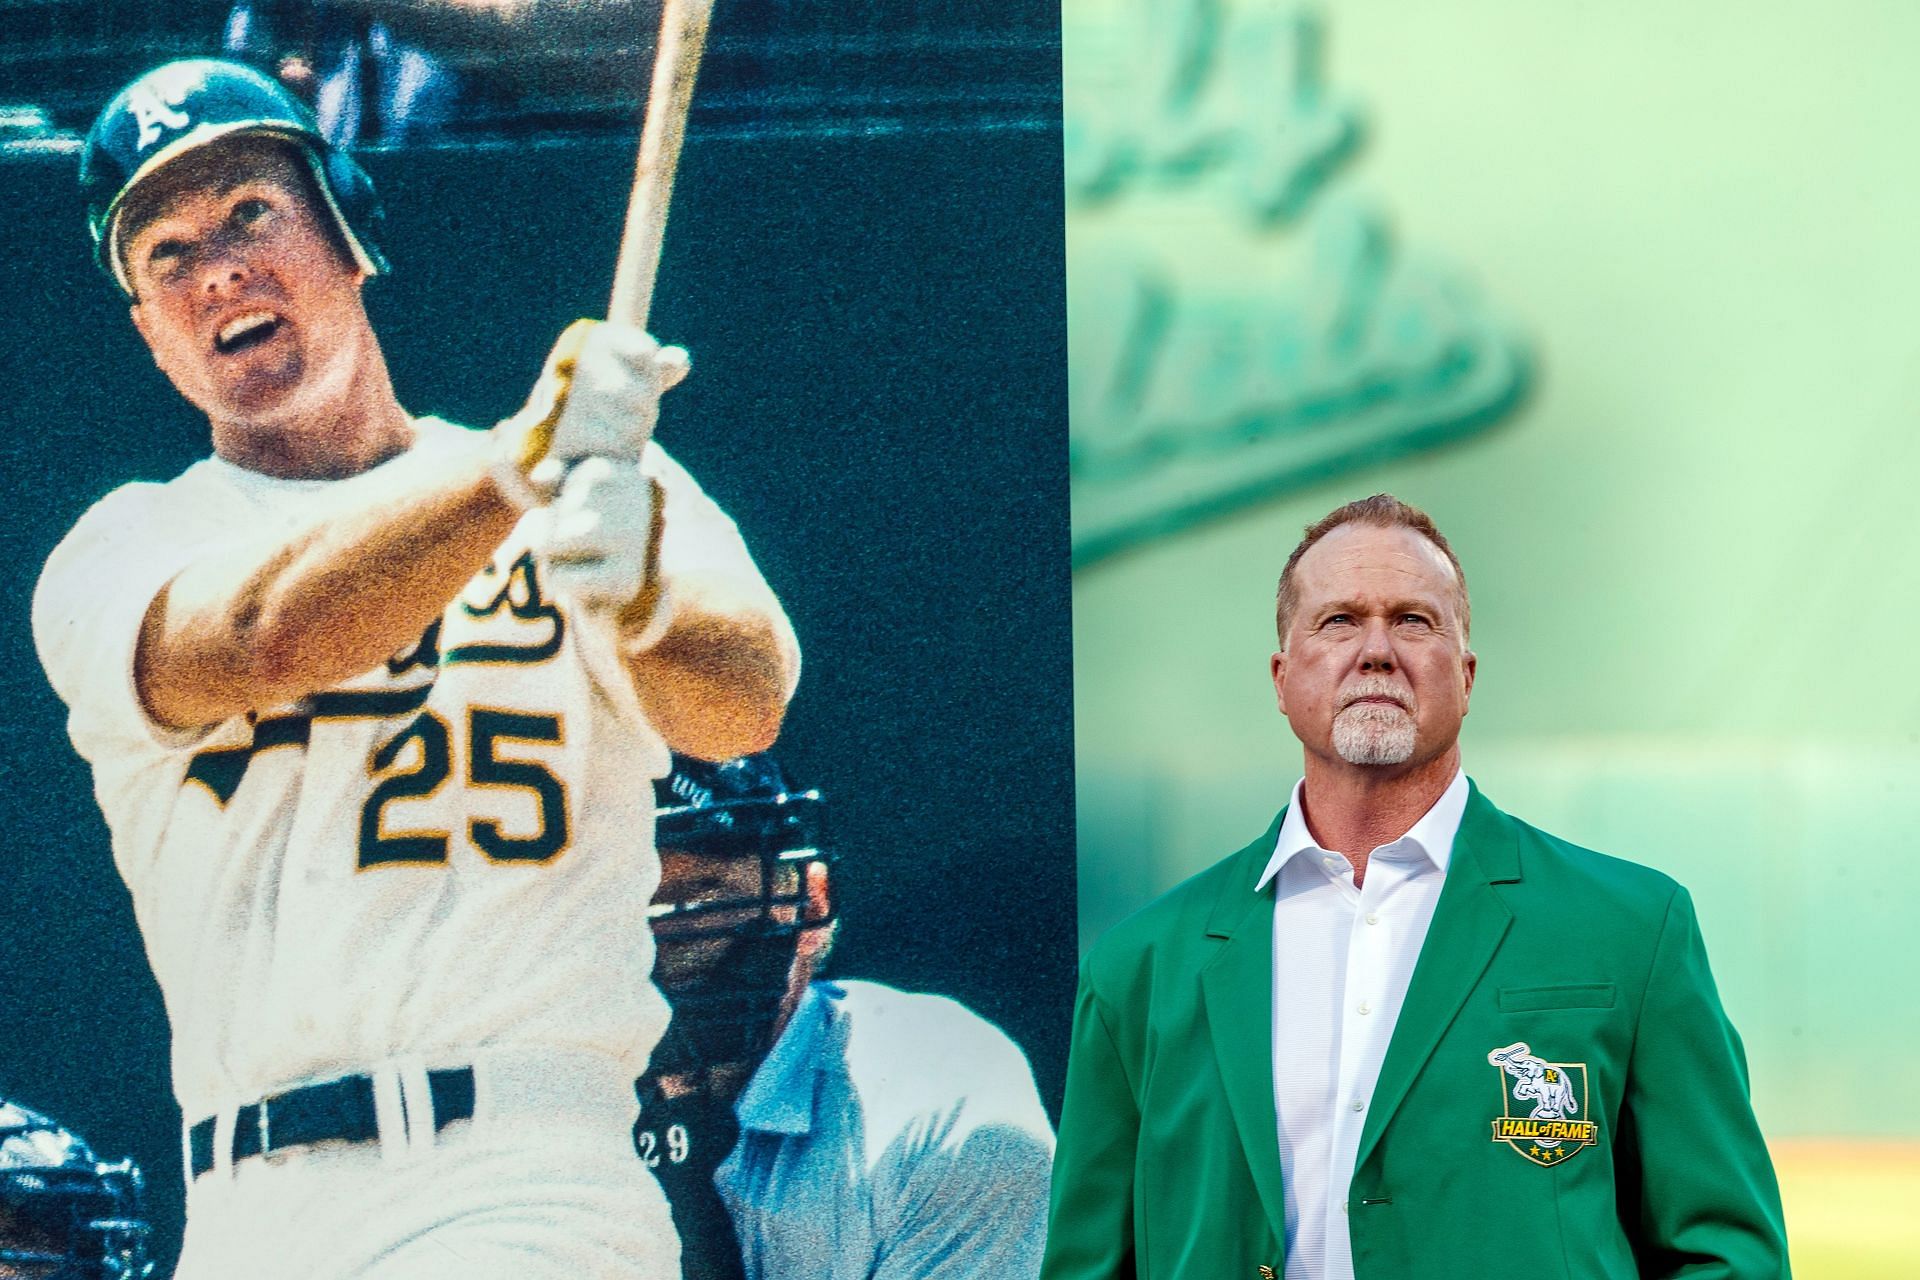 Former player Mark McGwire of the Oakland Athletics (Photo by Jason O. Watson/Getty Images)